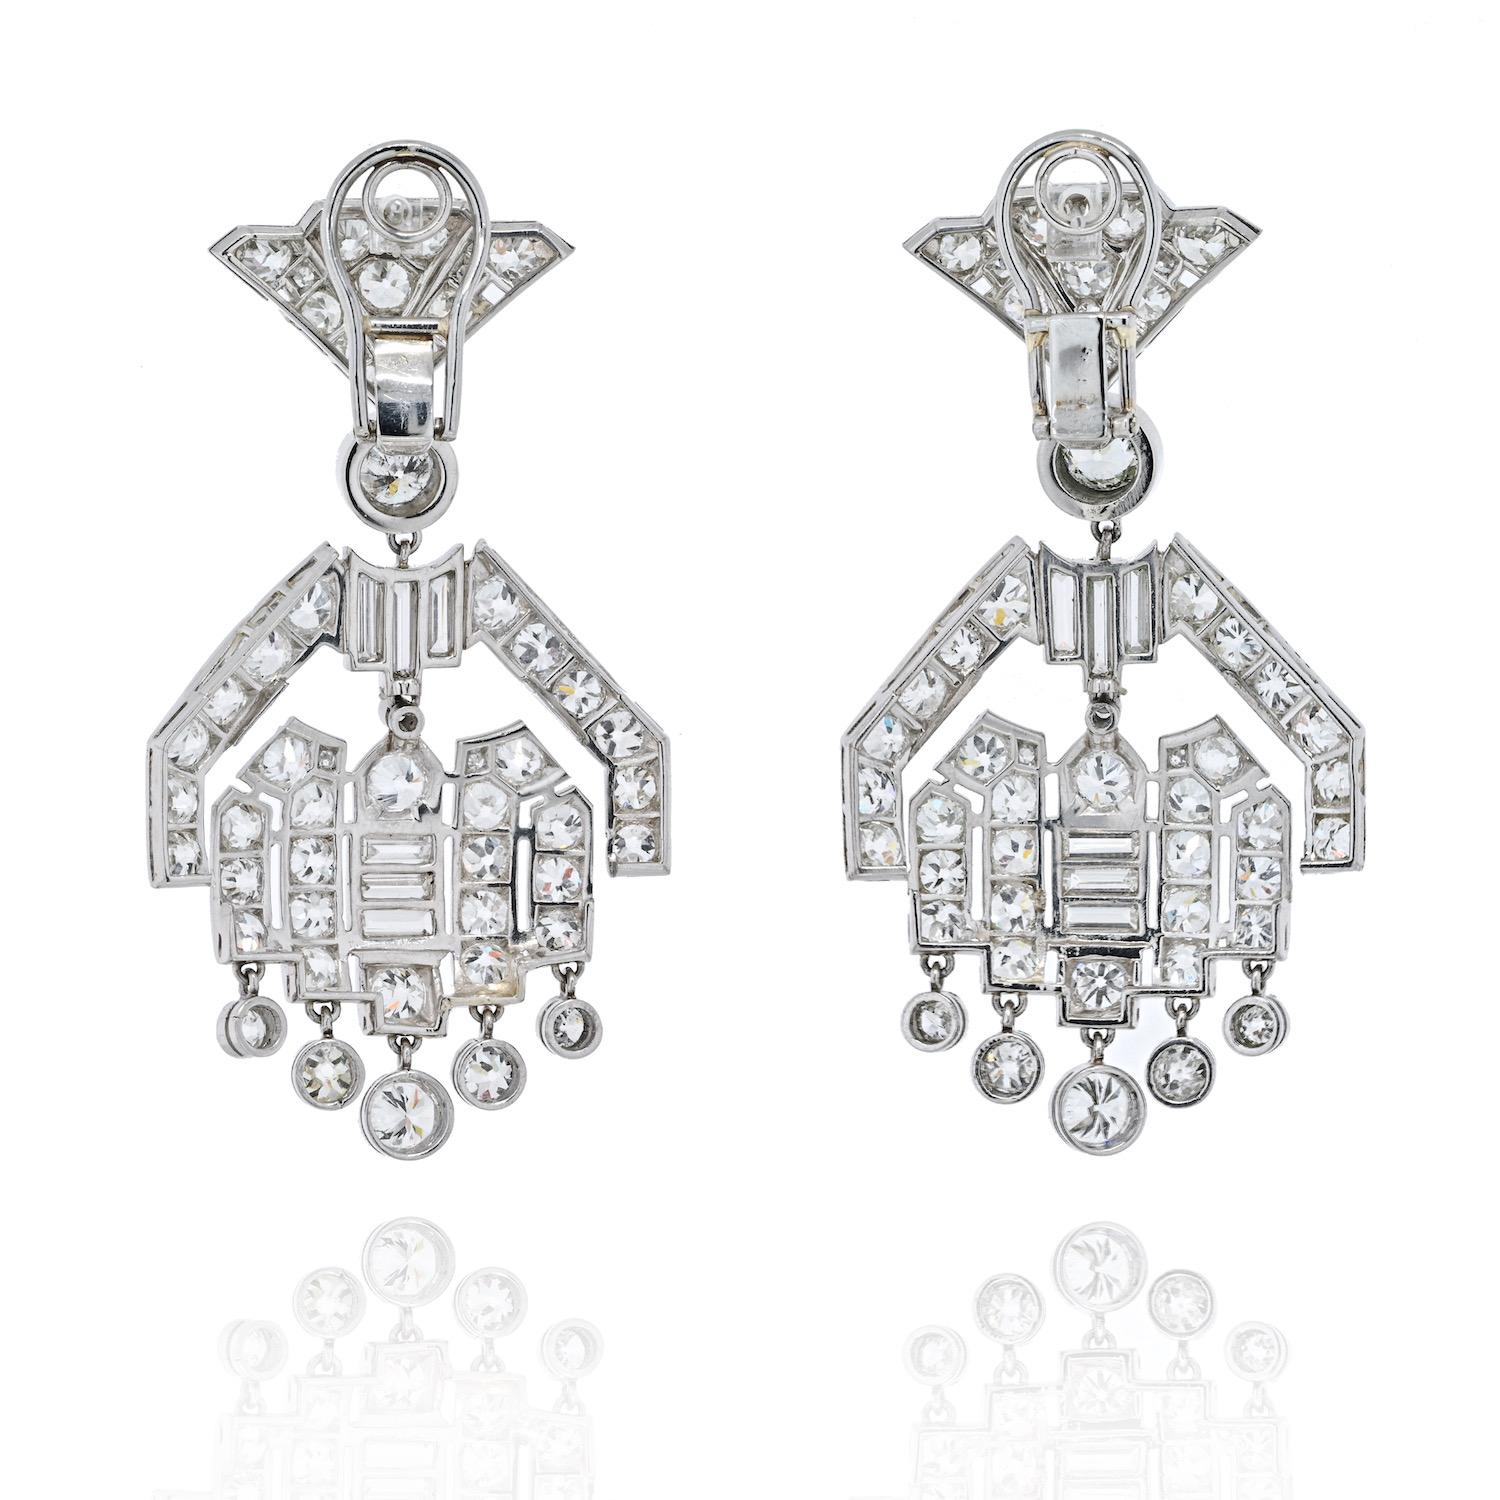 Diamond drop earrings from the Art Deco era are encrusted with 20 carats of old cut diamonds. Measuring about 5cm long these lively dangling earrings are in greate condition and deliver lots of sparkle.  The diamond studded chandeliers give way to